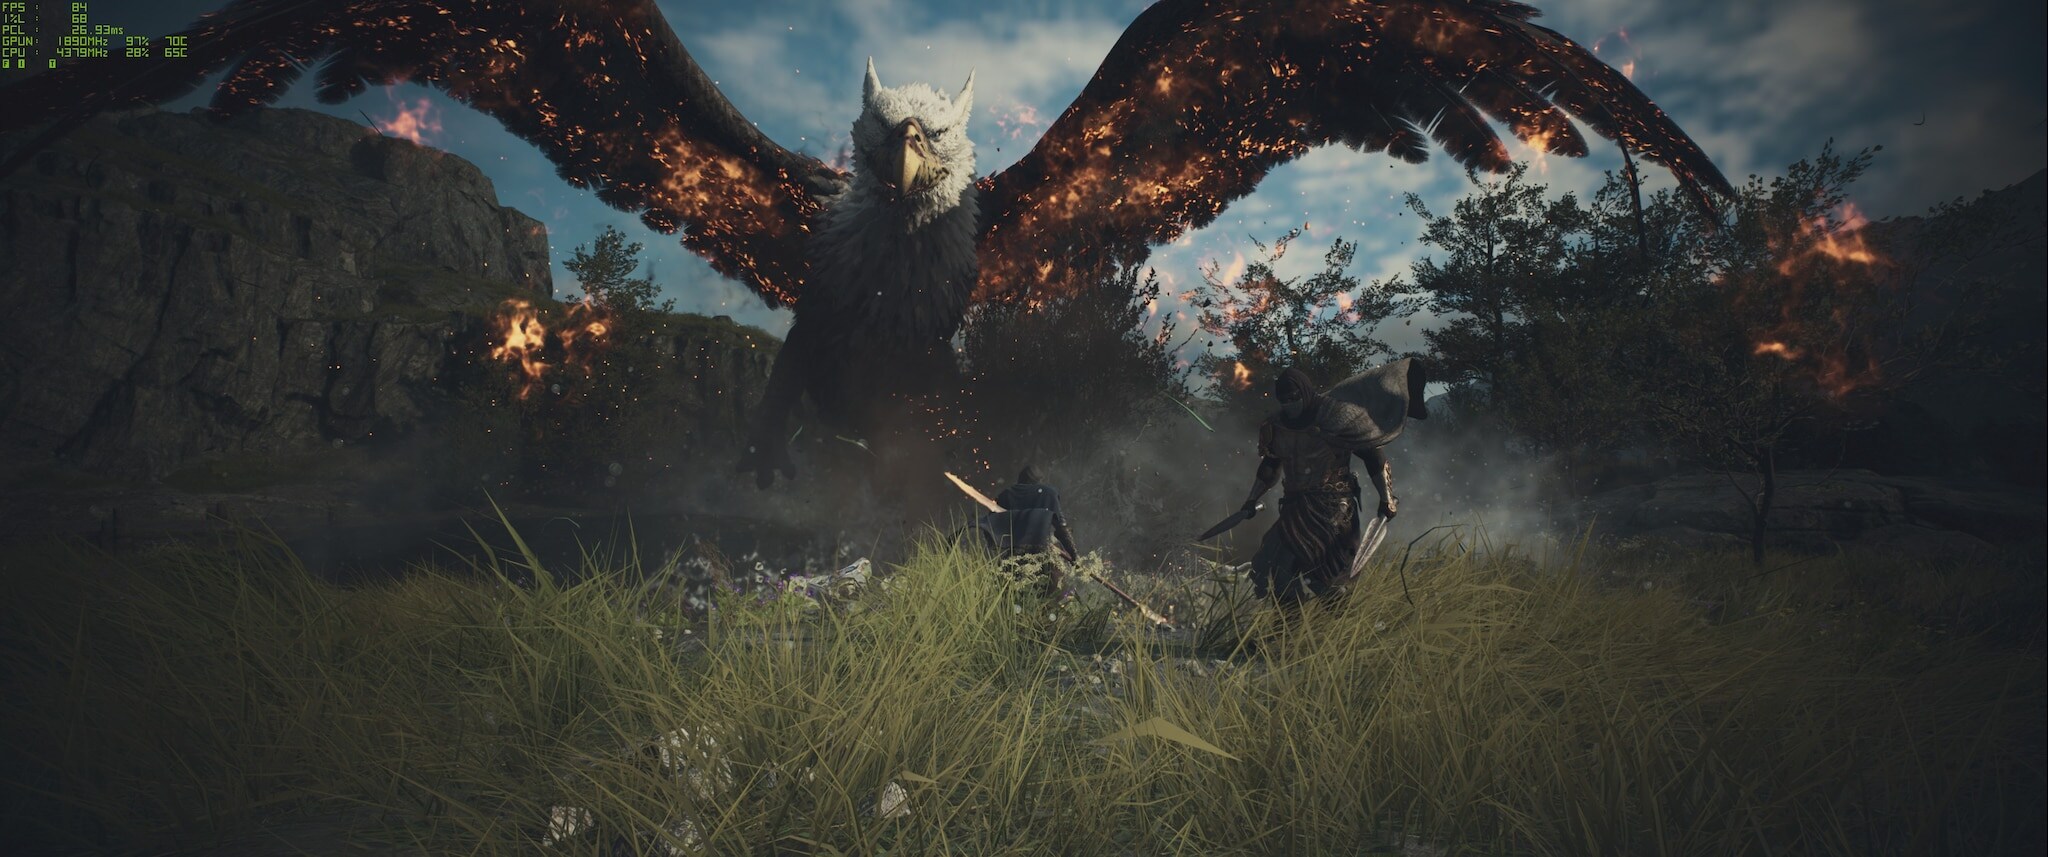 Dragon's Dogma 2 is a loveletter to fantasy and RPG enthusiasts | Image Source: Steam